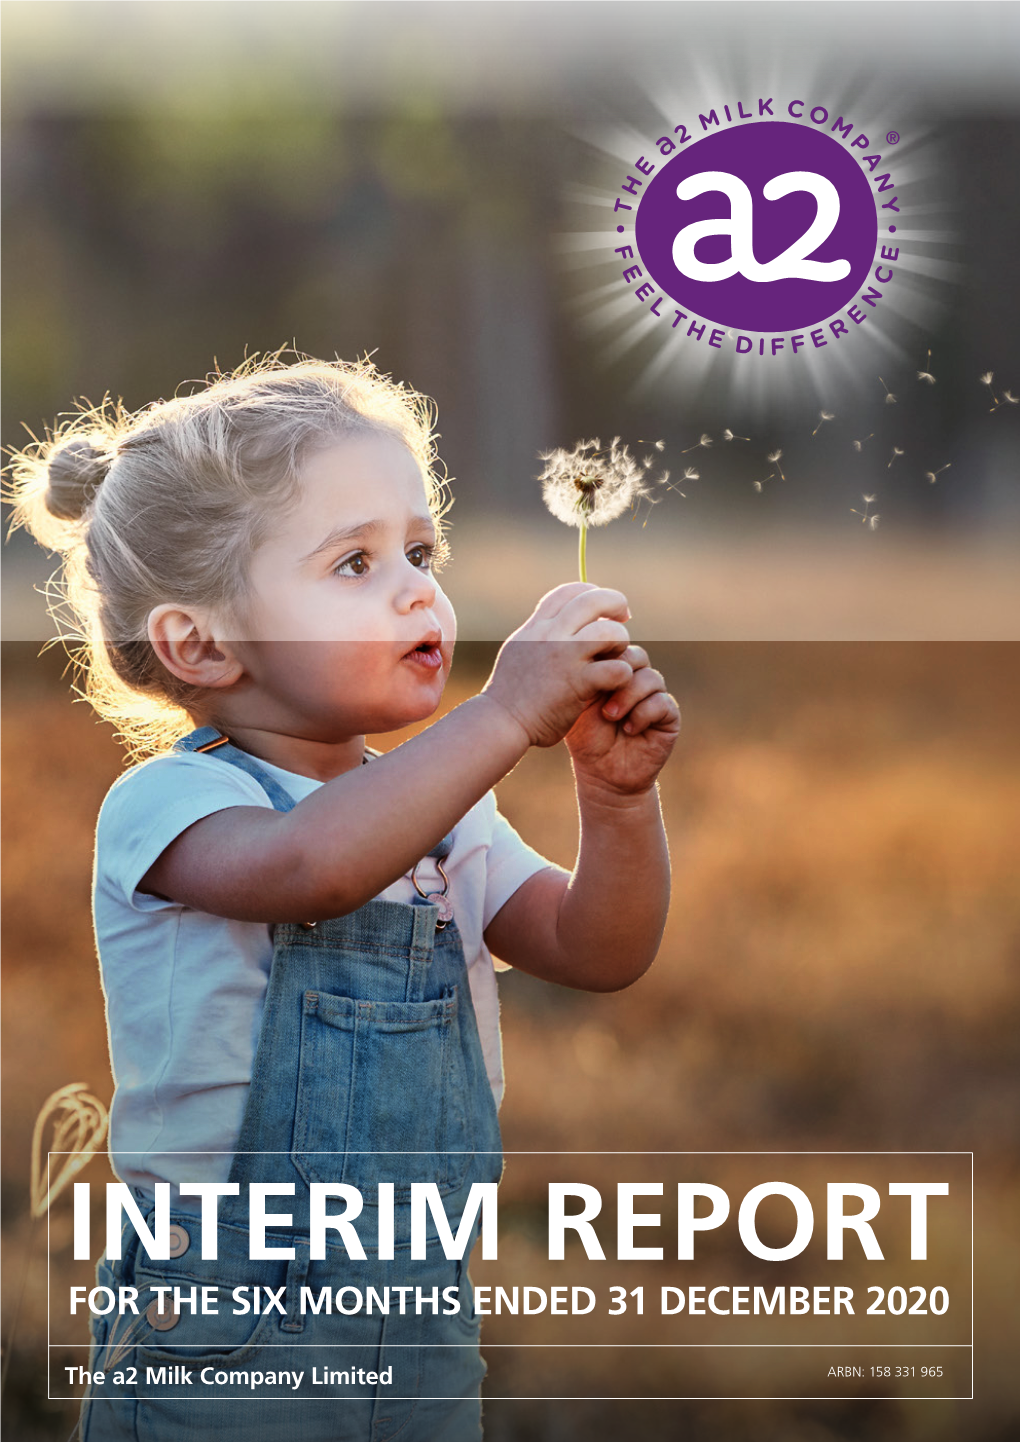 Interim Report for the Six Months Ended 31 December 2020